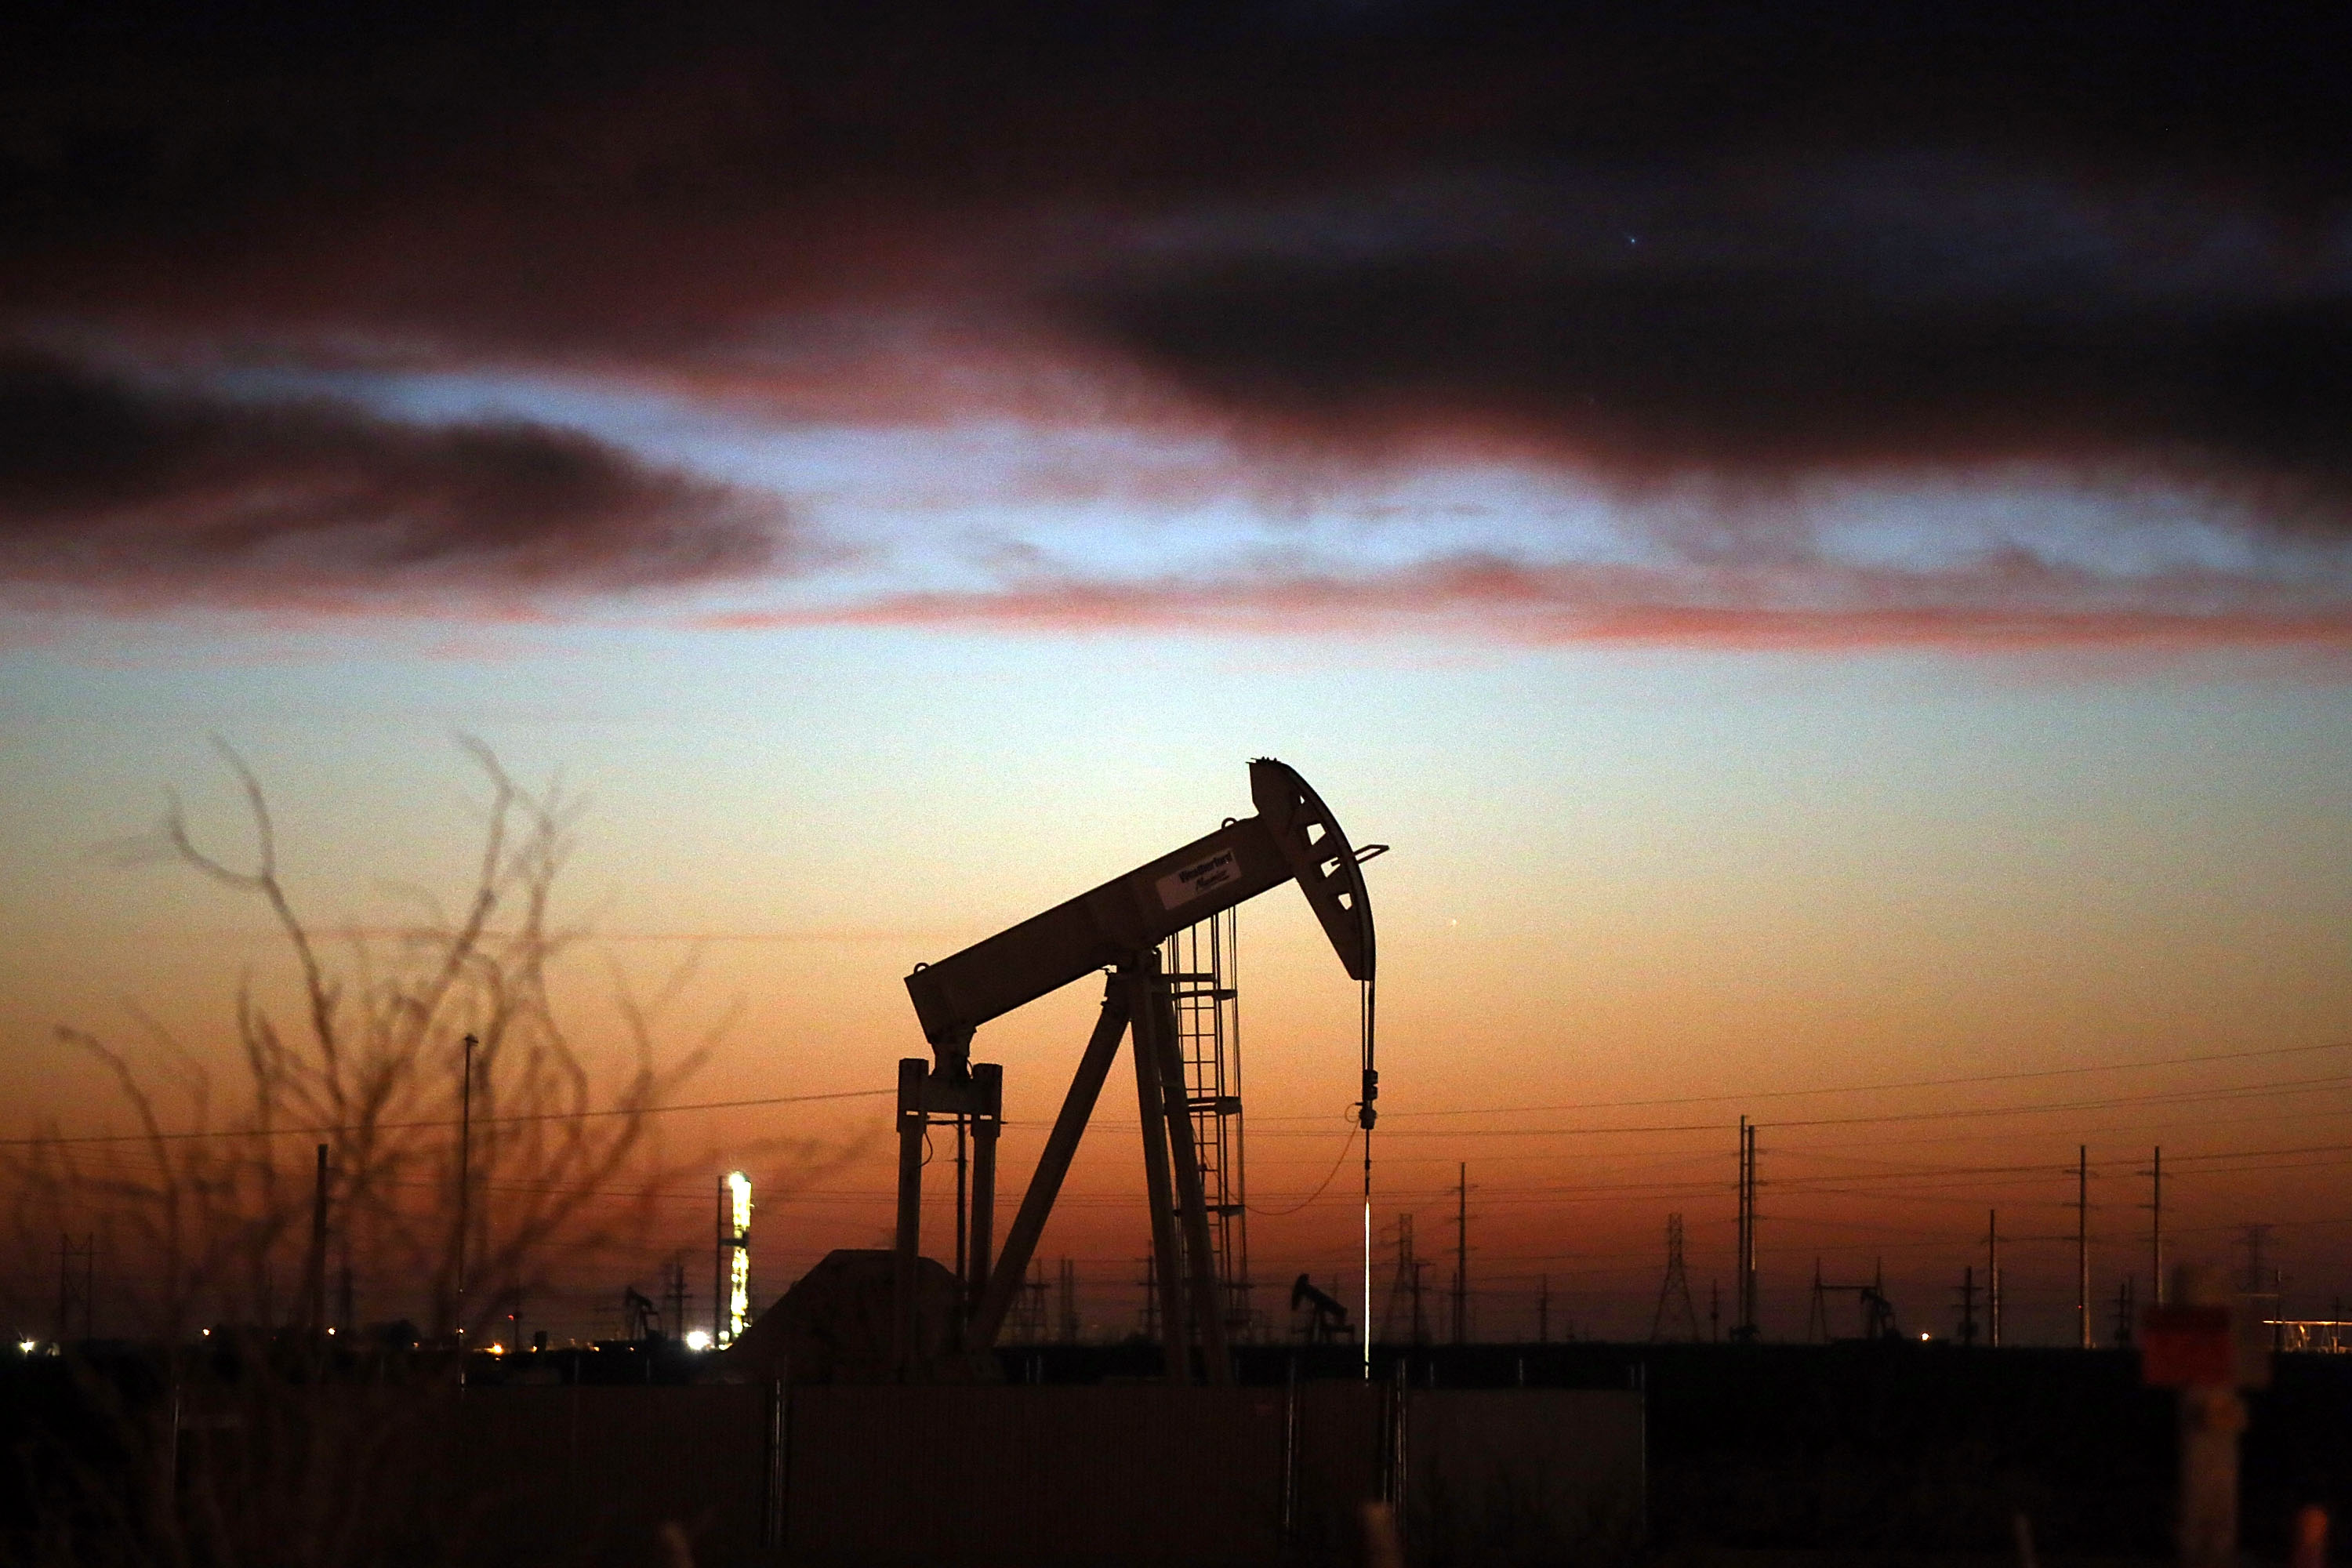 An oil pumpjack works at dawn in the Permian Basin oil field on Jan. 20, 2016 in the oil town of Andrews, TX. (Spencer Platt—Getty Images)